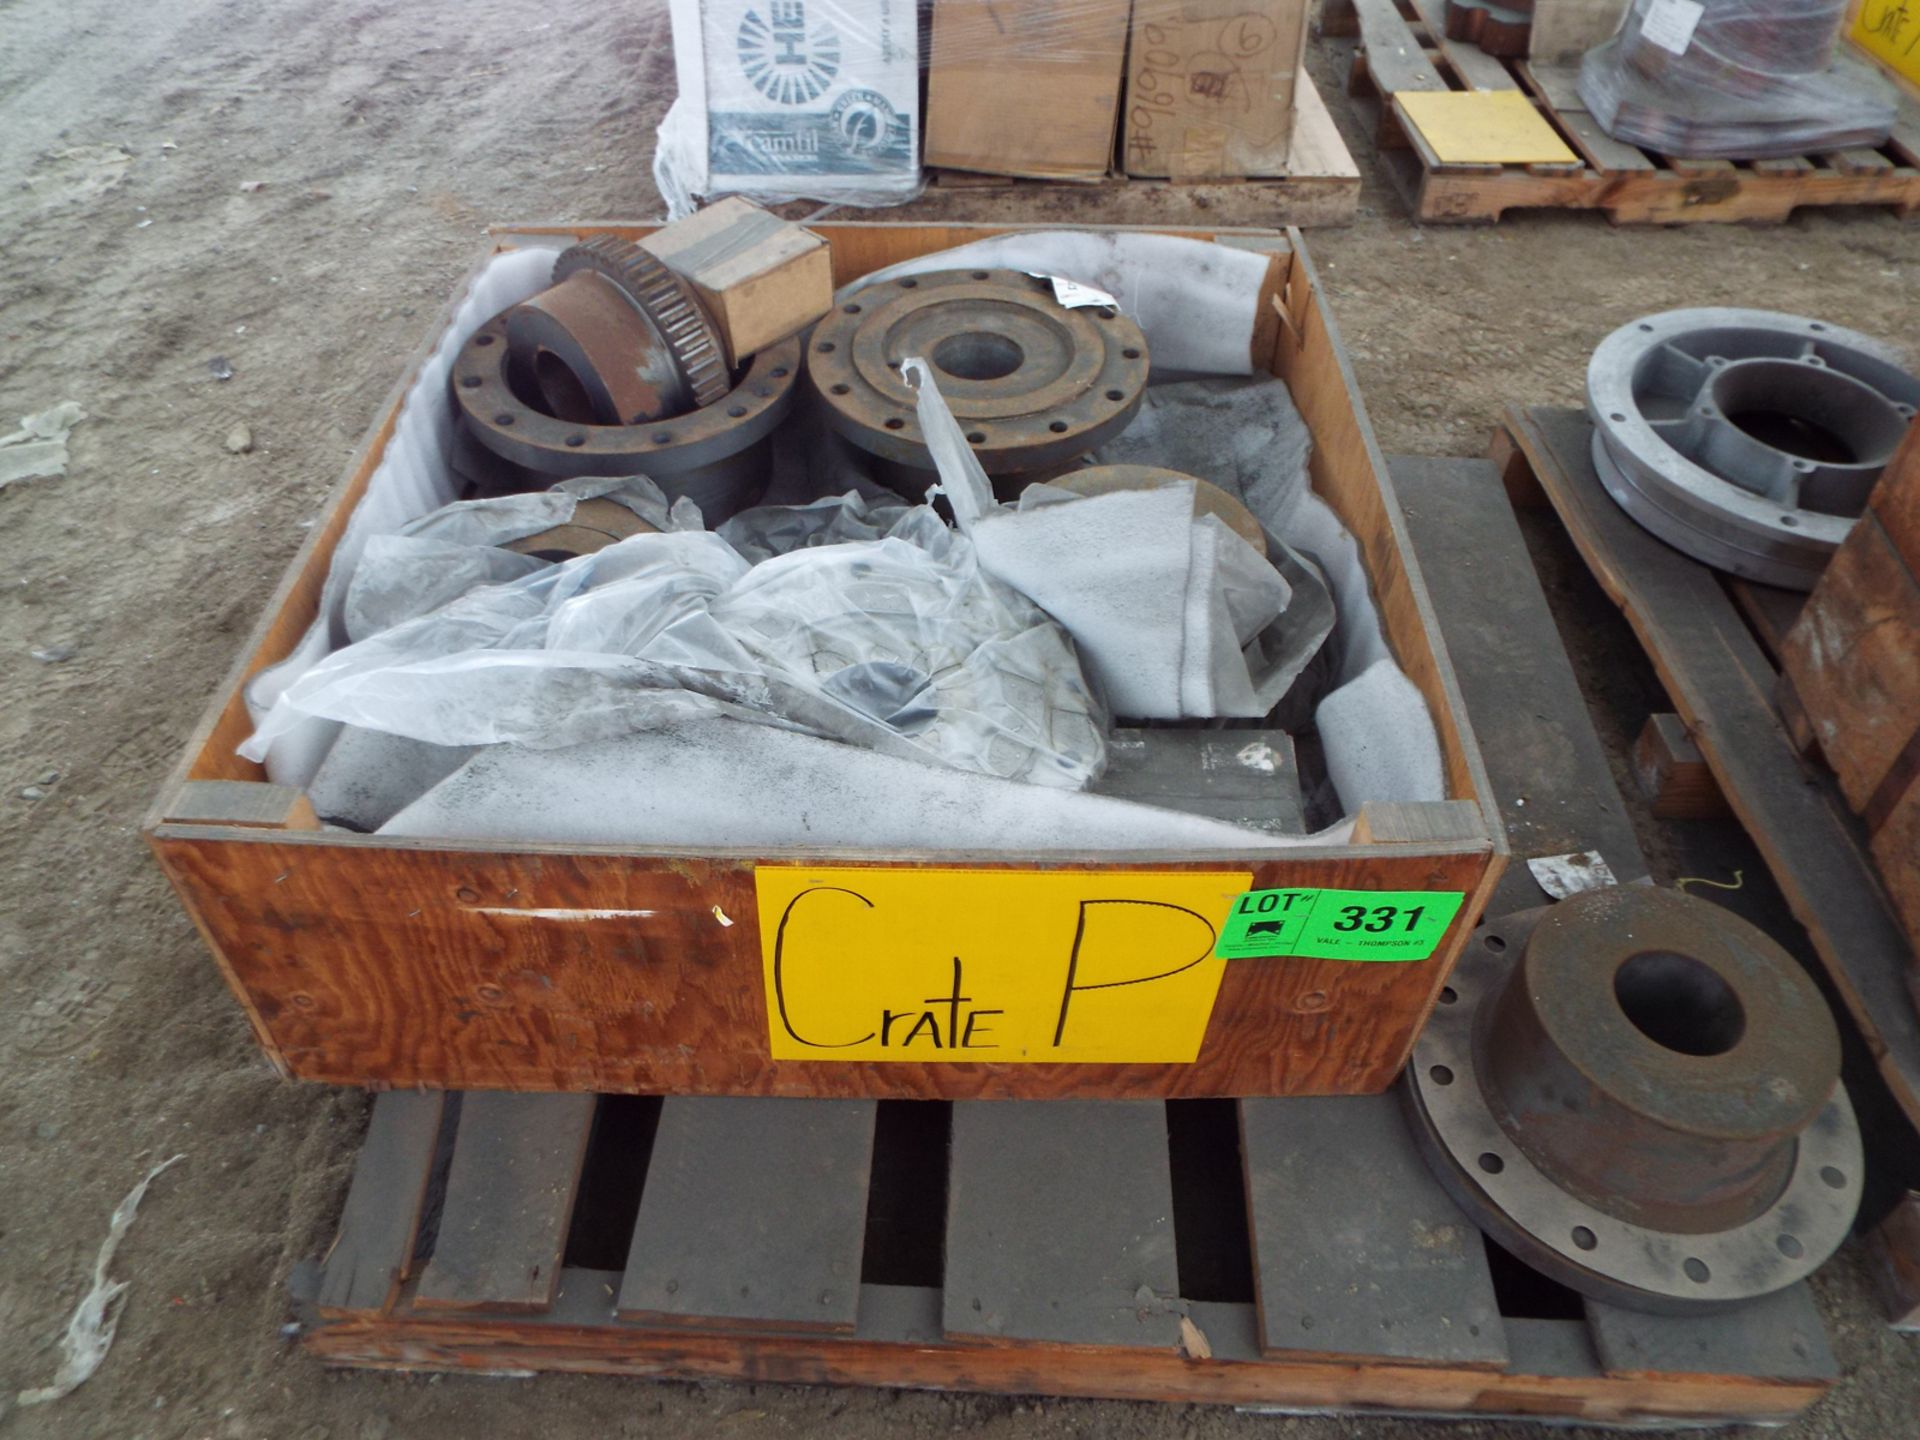 LOT/ CONTENTS OF SKID - KOERING PROVINCIAL COUPLINGS (CRATE P)